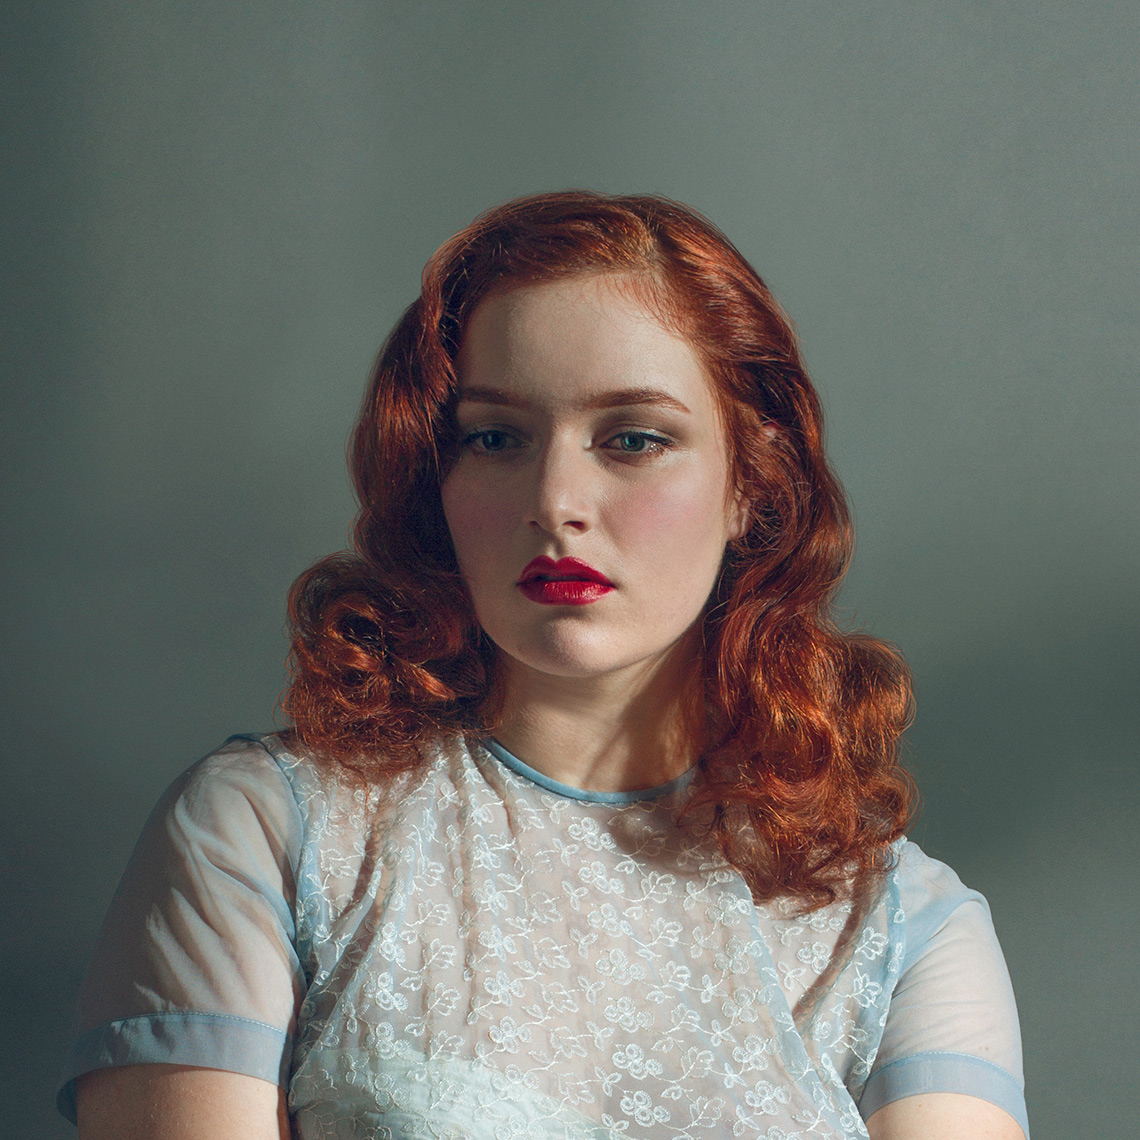 Head & shoulders beauty portrait of a pretty, fair, blue-eyed young woman with shoulder-length wavy red hair, bright red lipstick, and a sheer light blue silk short-sleeved blouse.